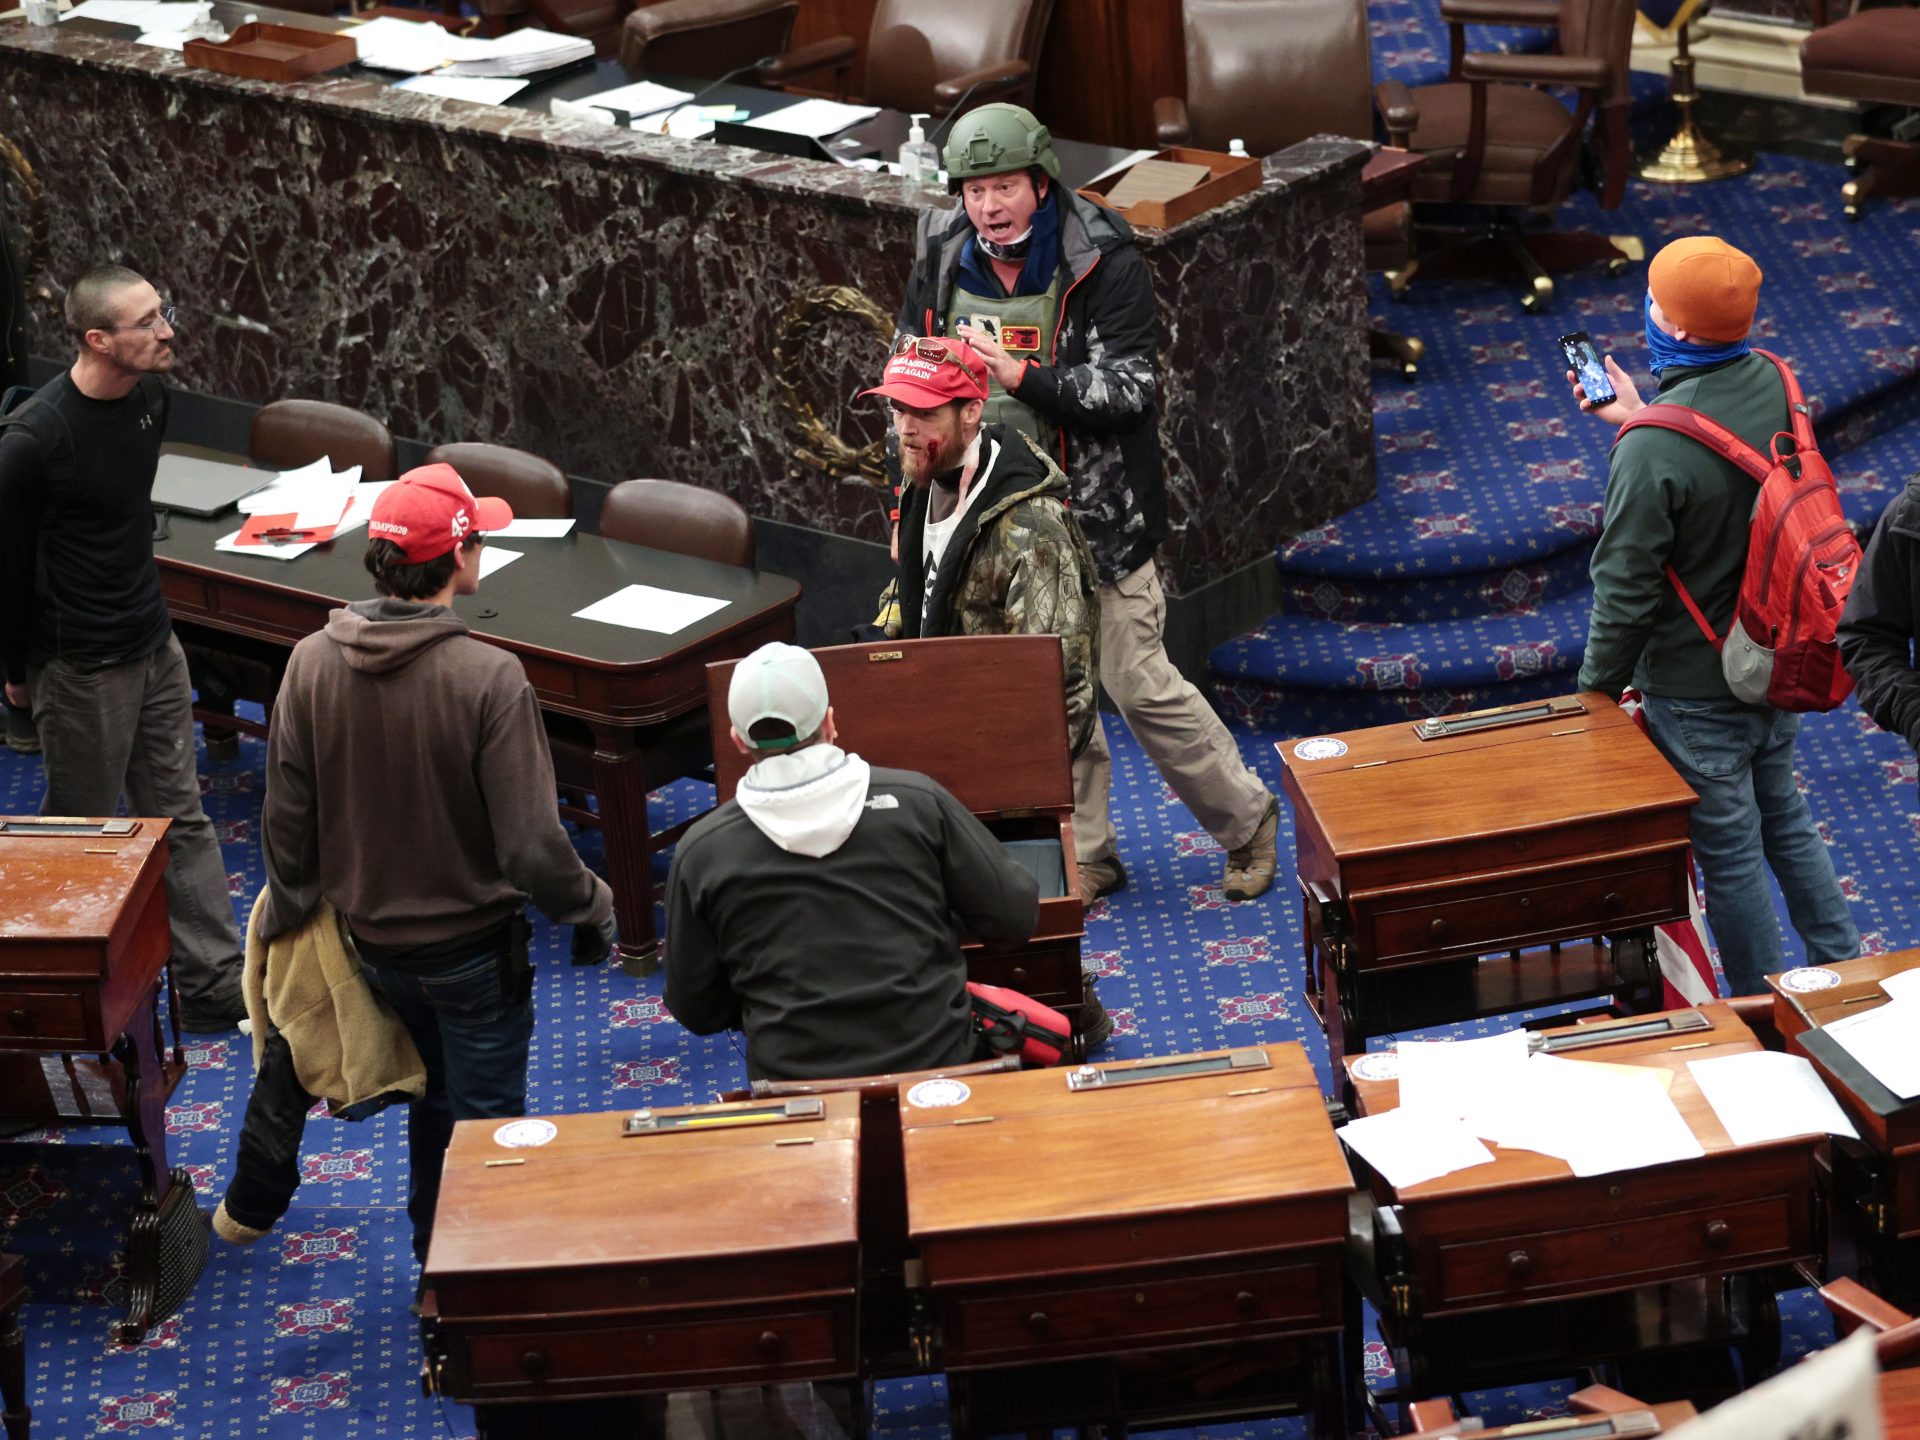 Bruno Cua is allegedly seen here with his back to the camera, holding a tan jacket. Prosecutors say he entered the Senate chamber of the U.S. Capitol on Jan. 6 with a handful of other rioters.